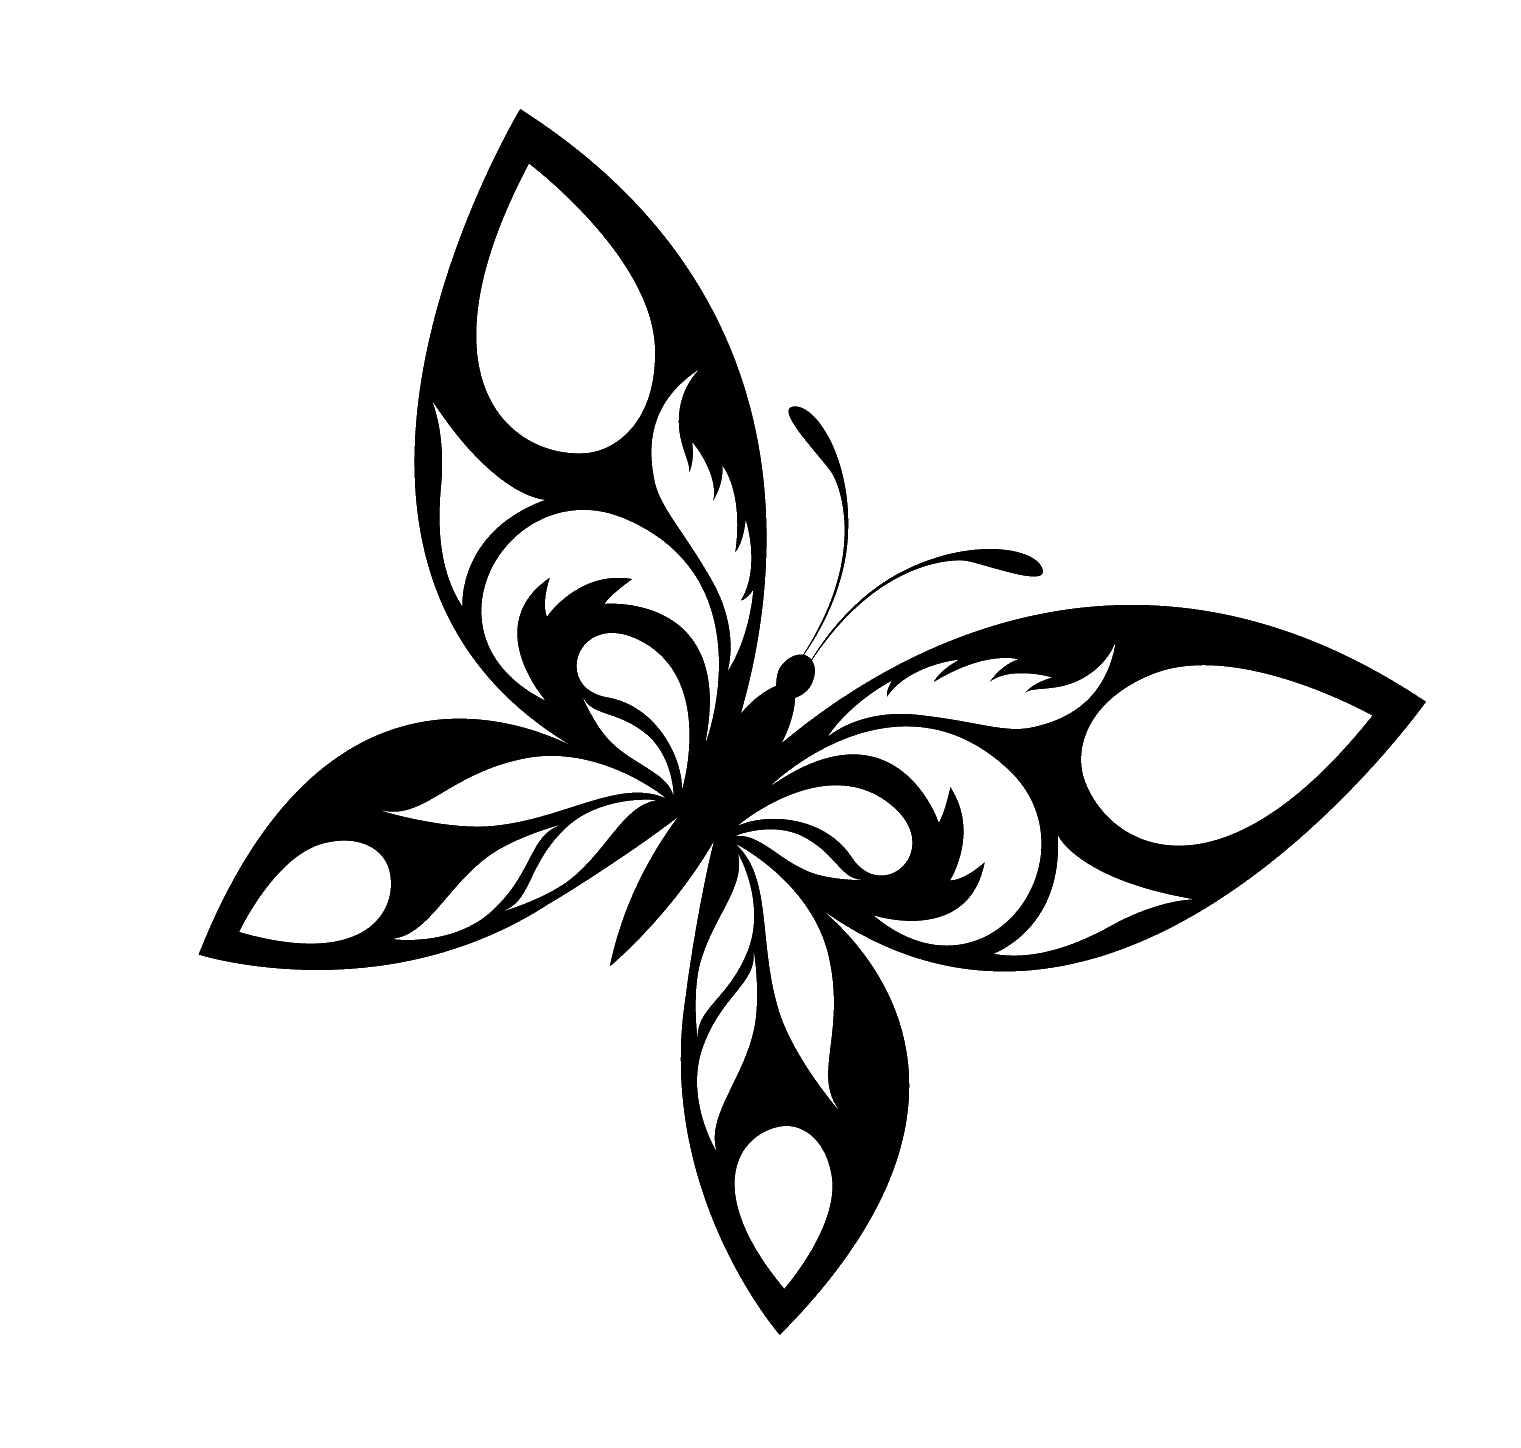 Flower and butterfly border d